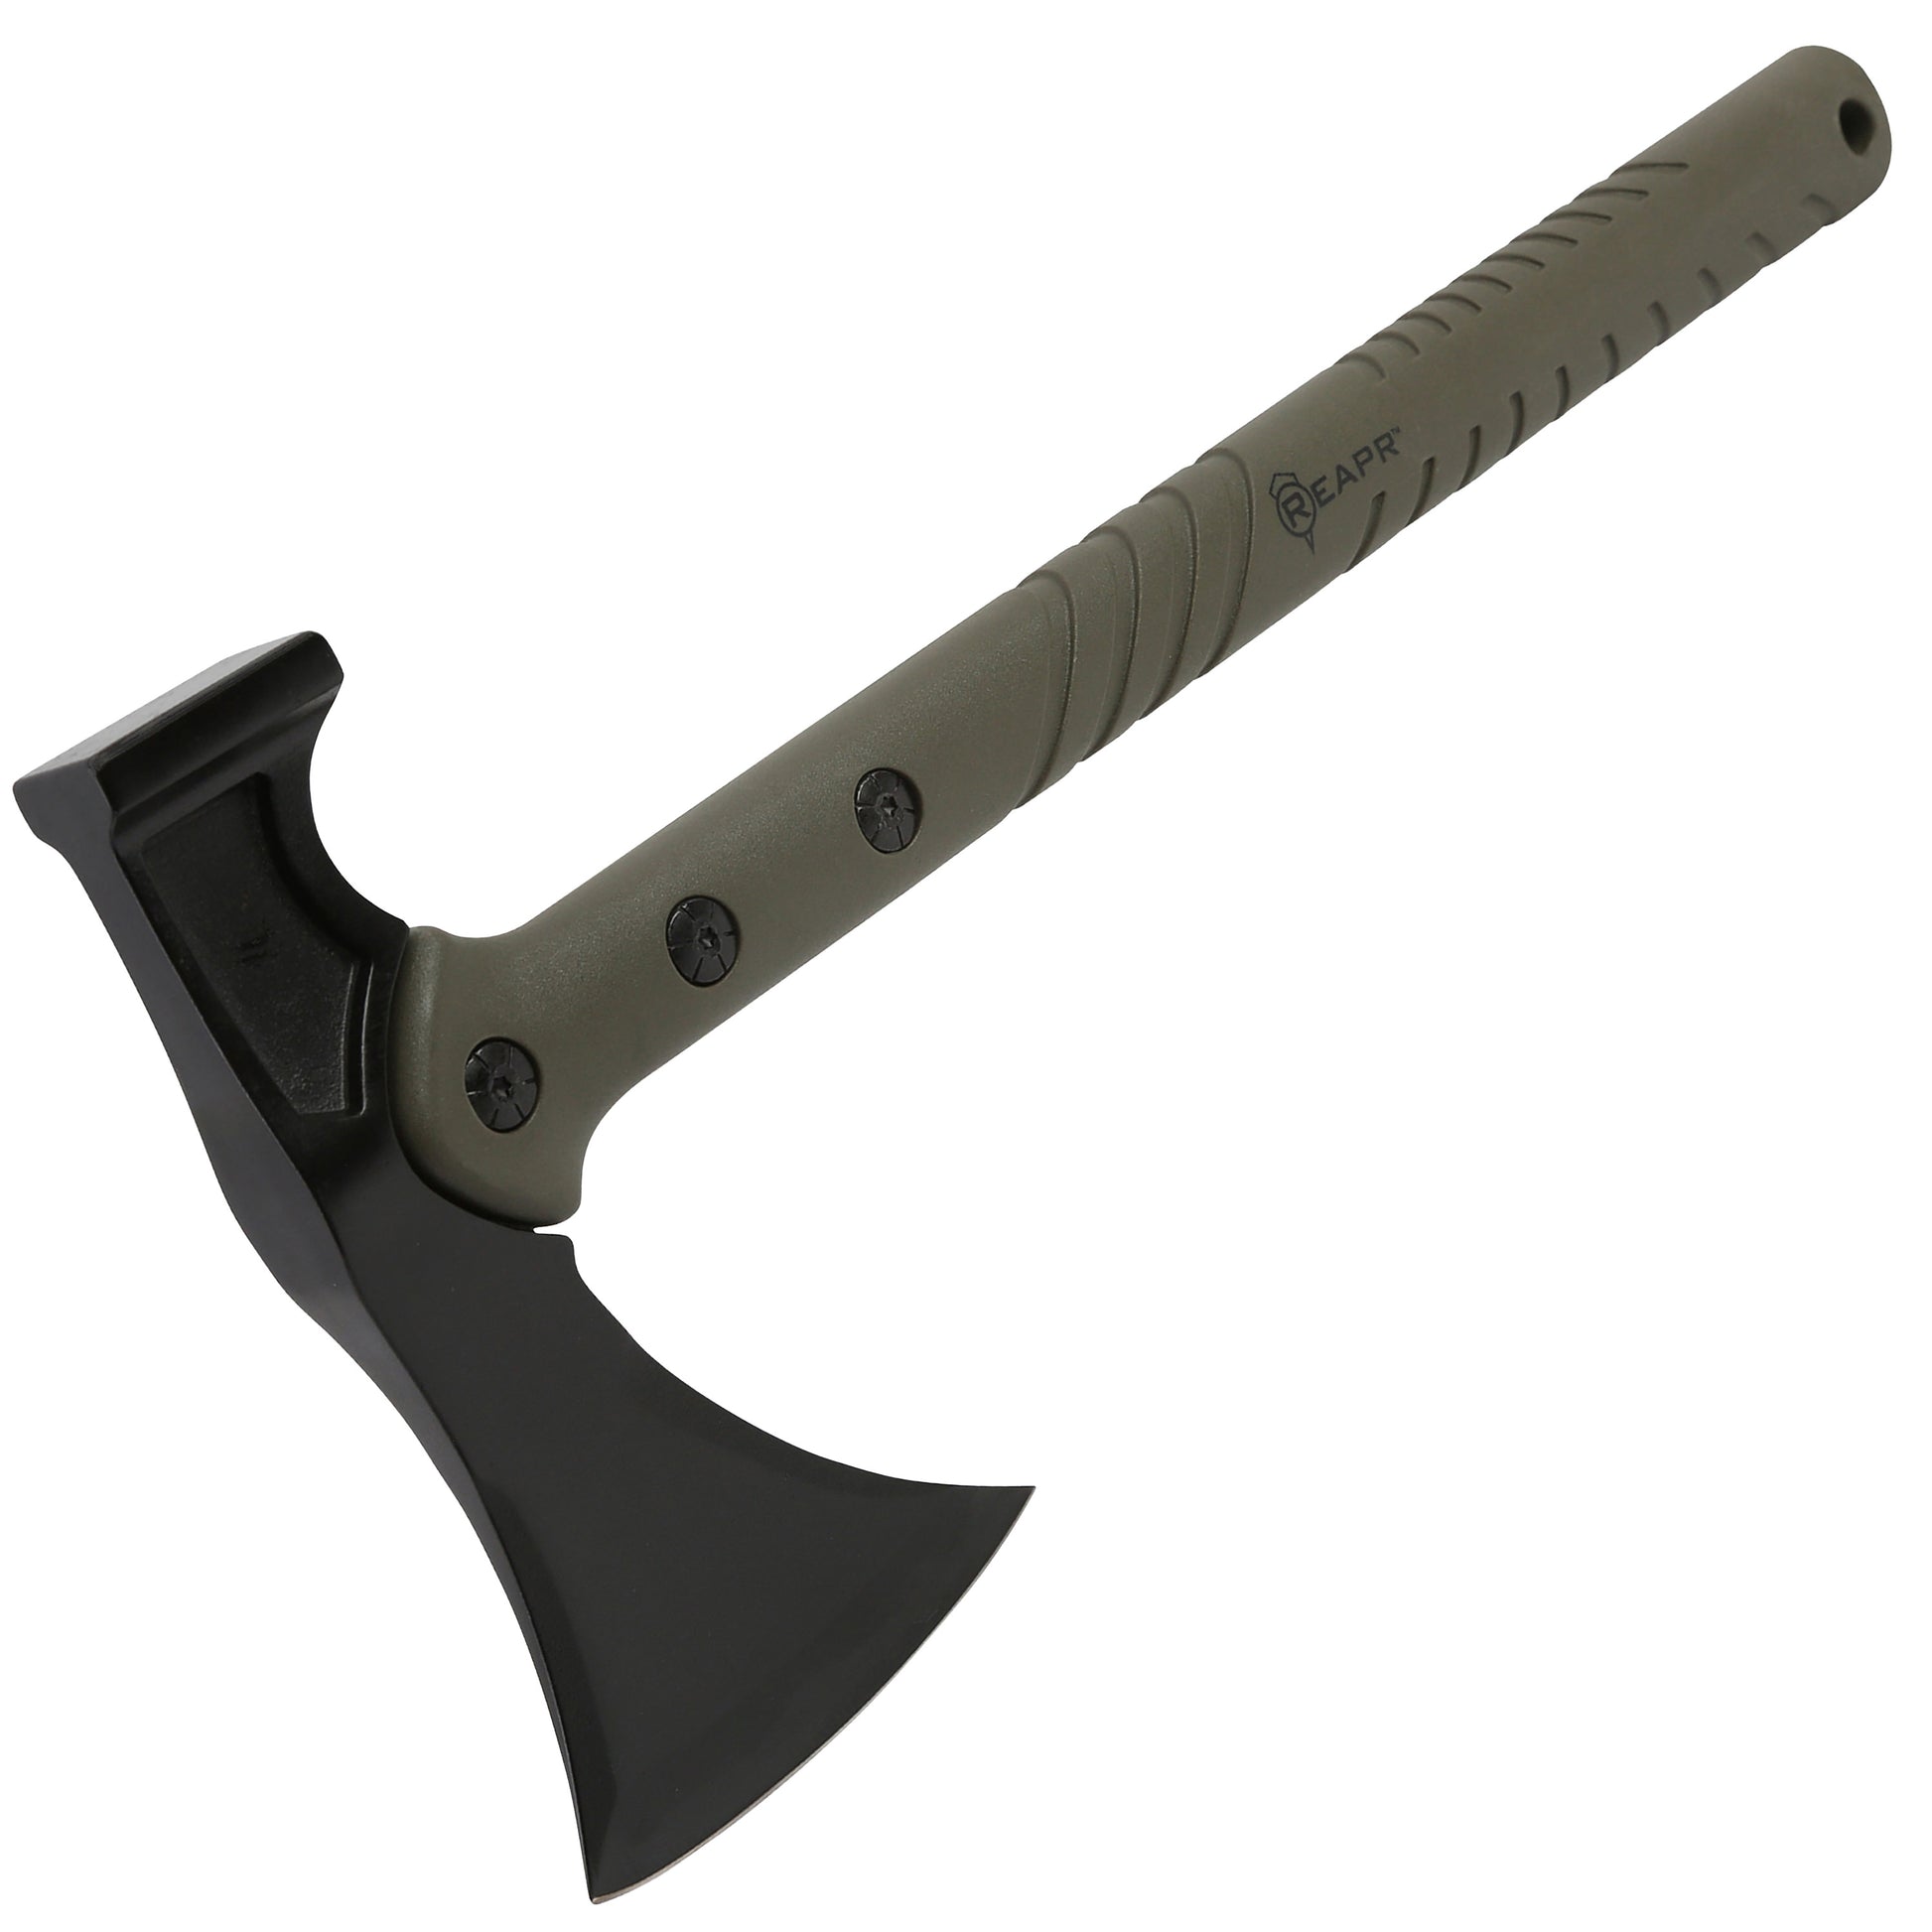 REAPR 11778 Sparrow Hammer Axe, stainless steel precision cast head, two-in-one axe and hammer combination 